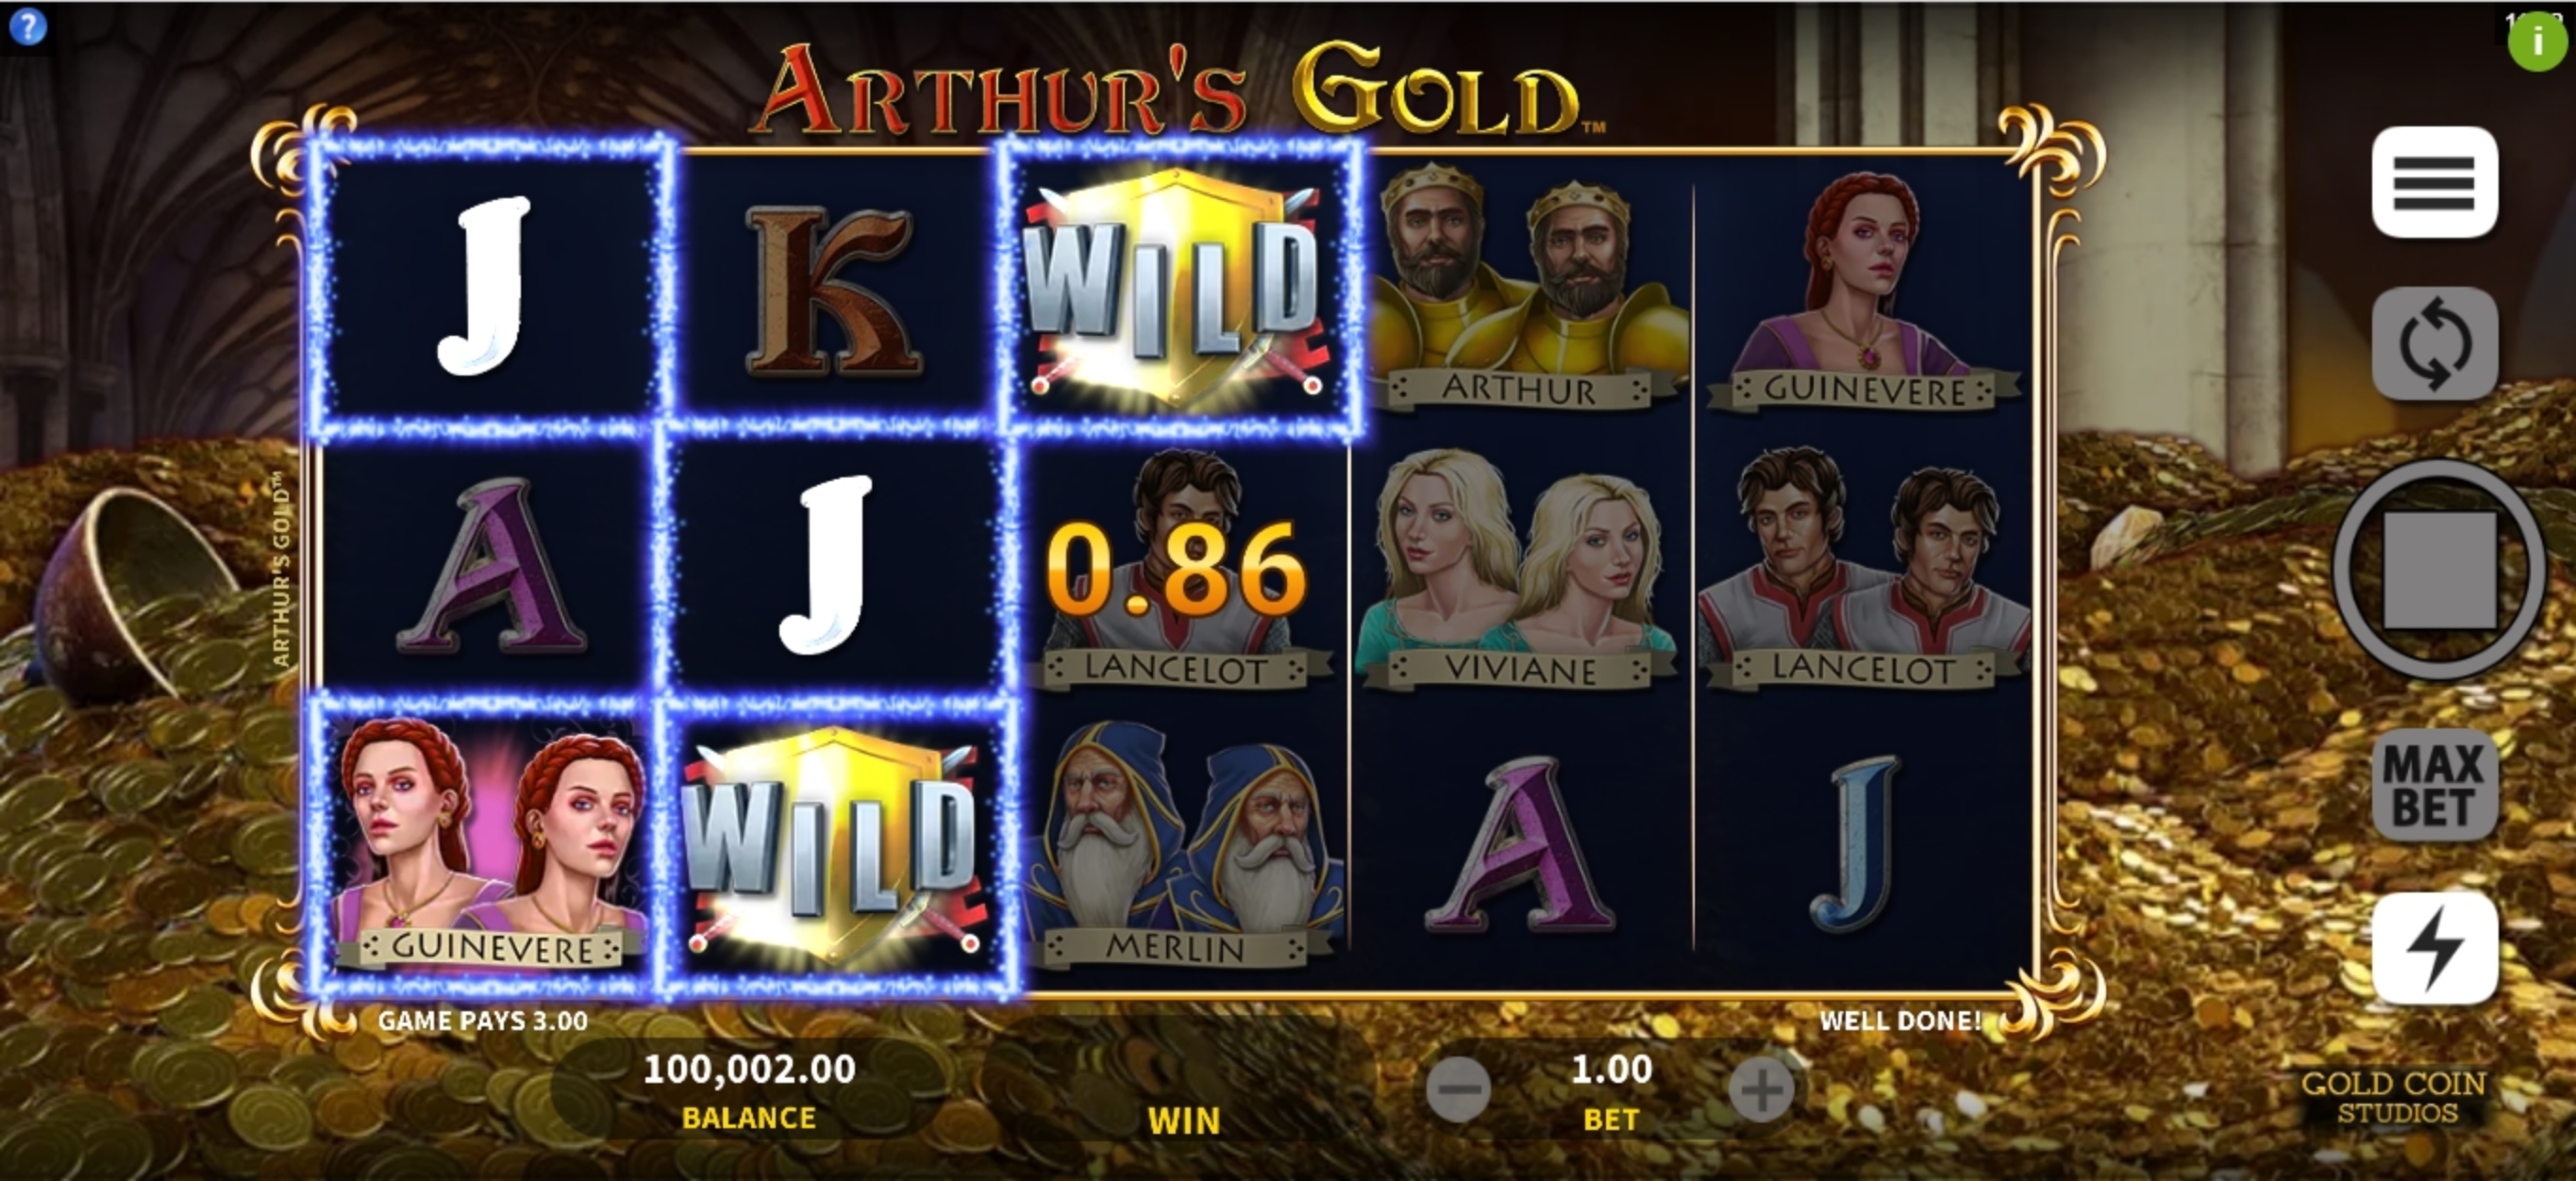 Win Money in Arthurs Gold Free Slot Game by Gold Coin Studios